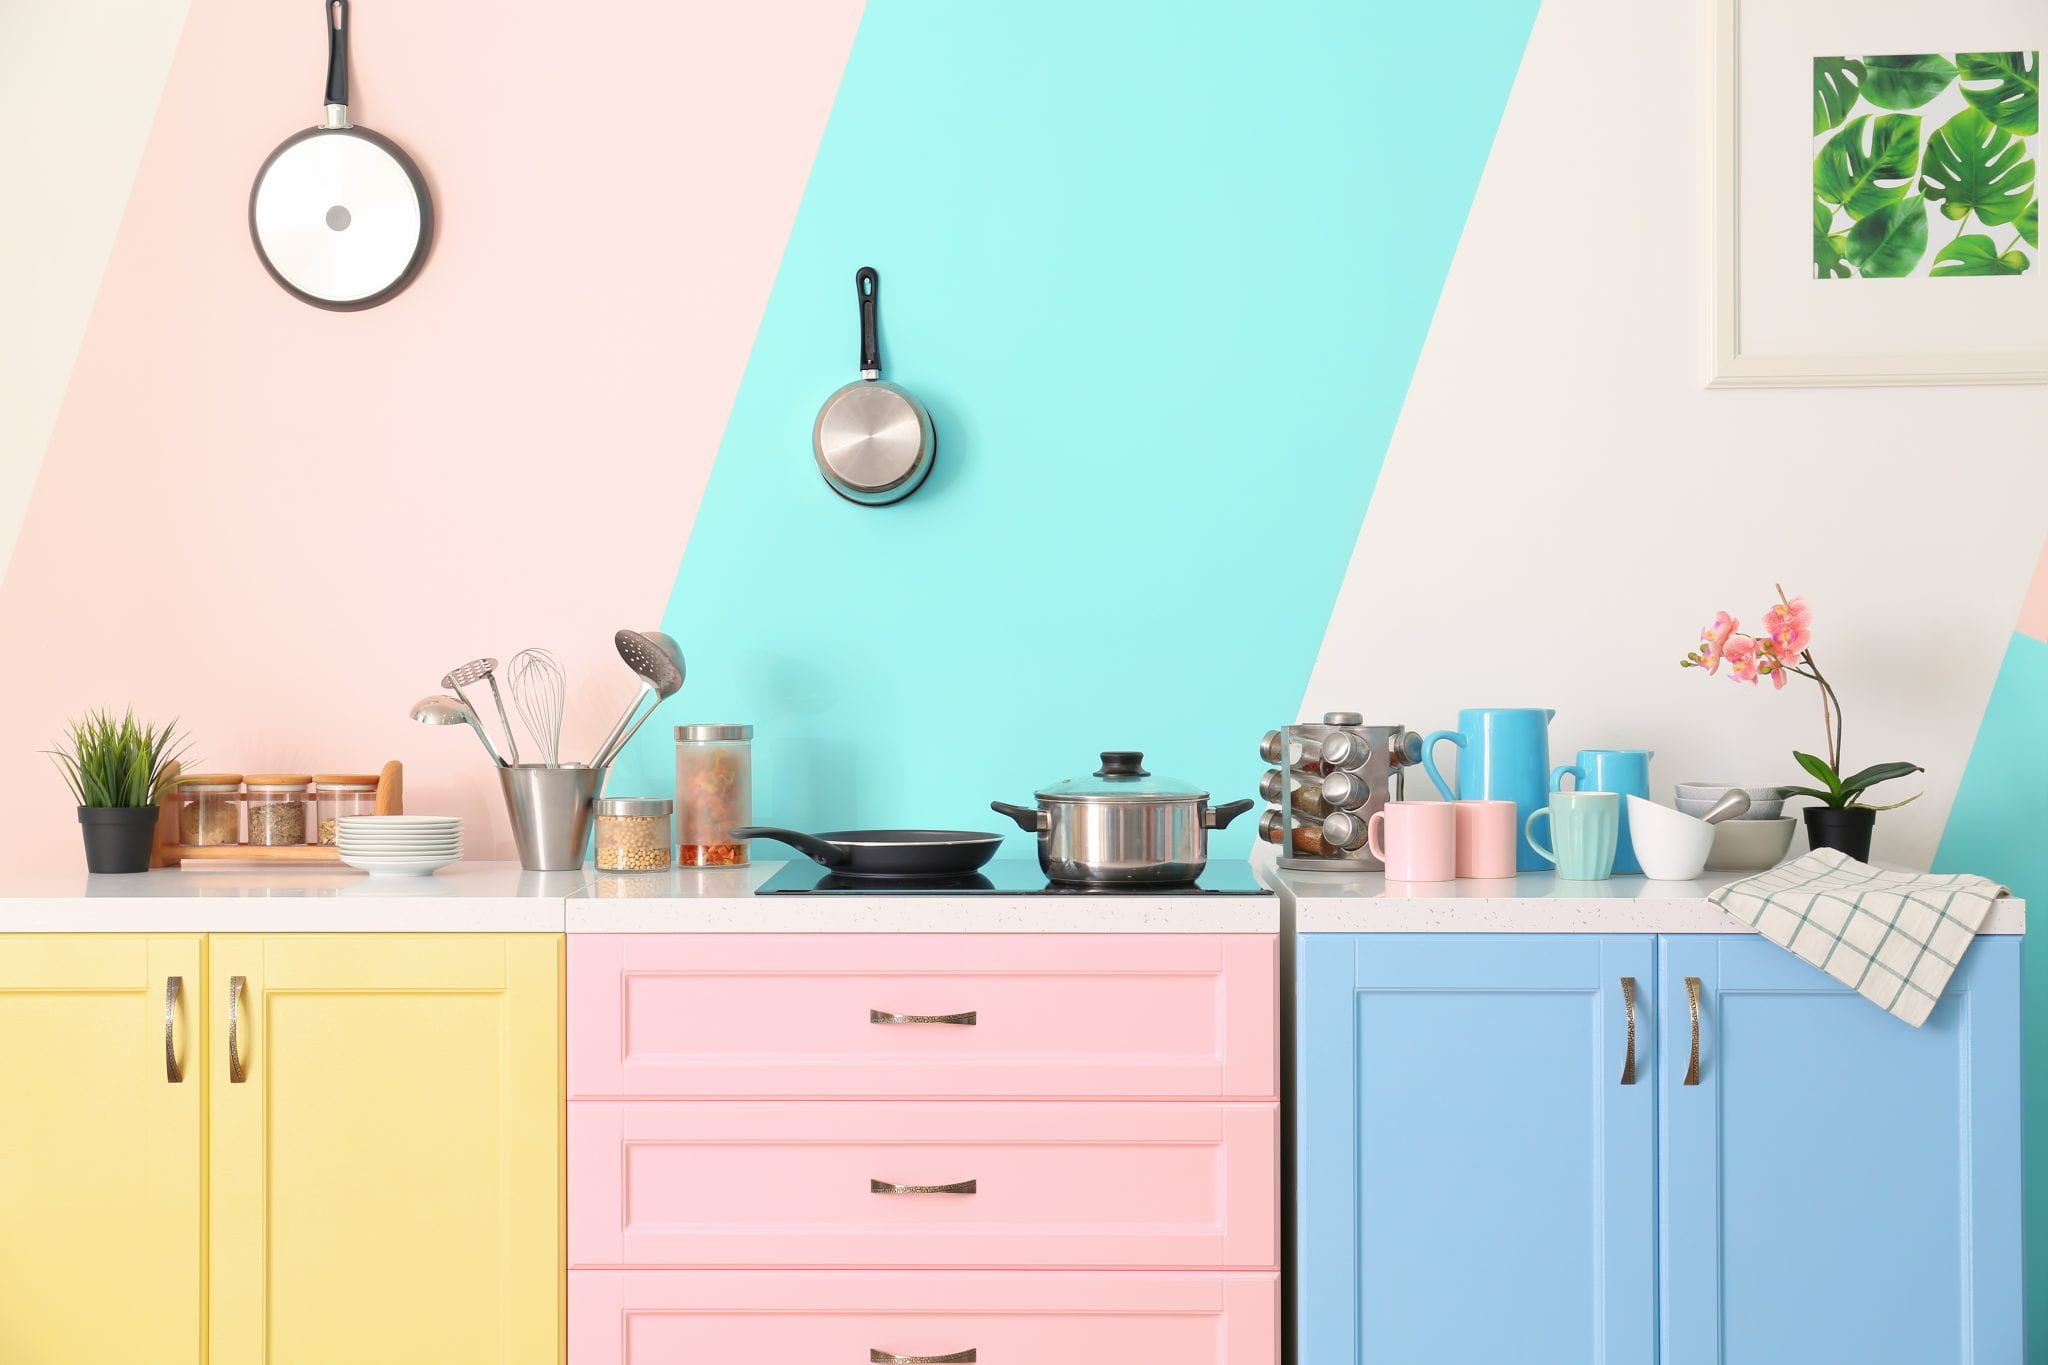 Yellow, pink, and blue kitchen cabinets with pink and blue striped walls. (Hint: the best kitchen paint colors aren't any of these!)